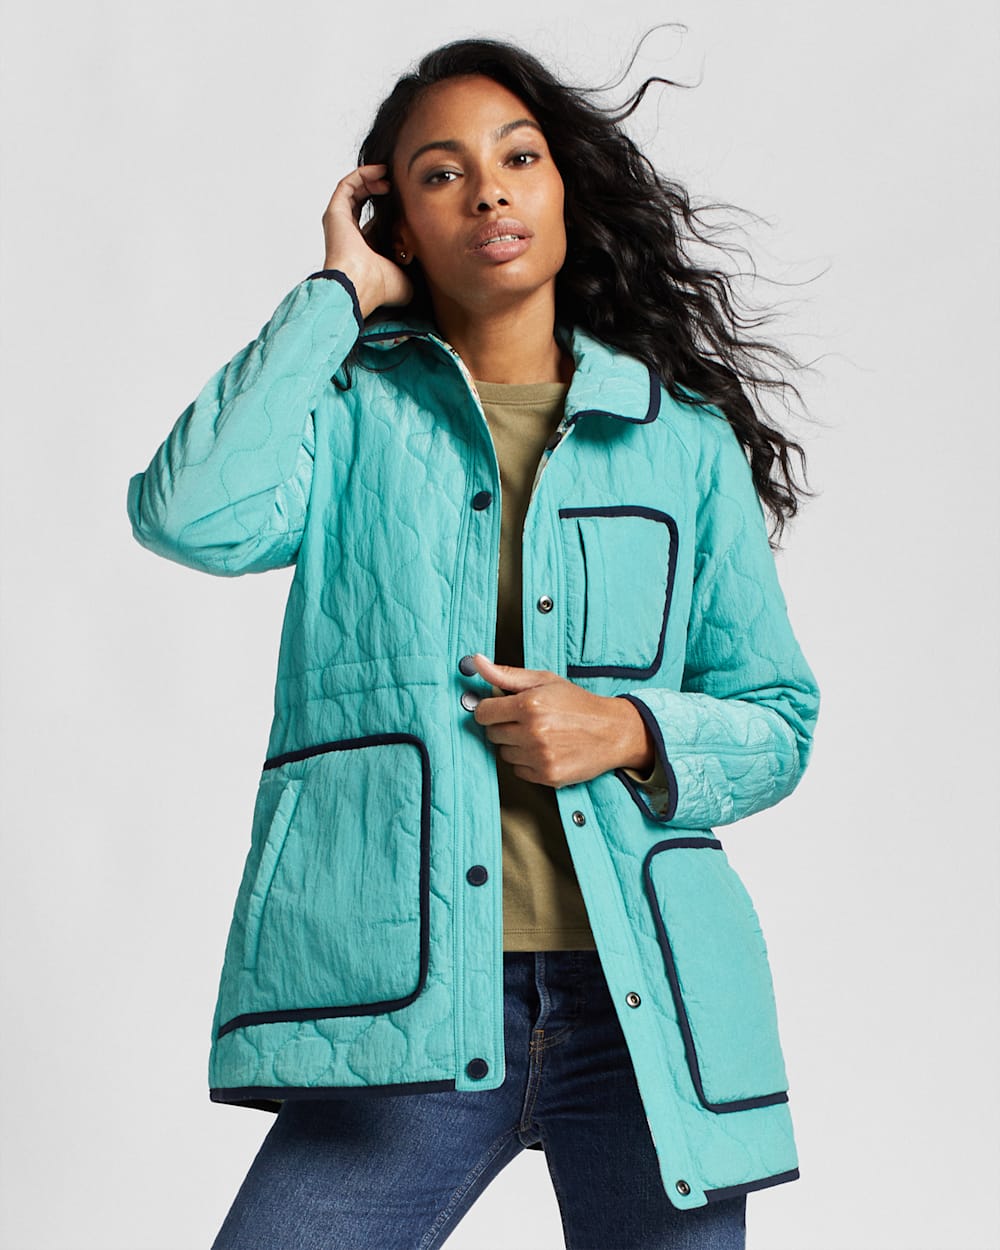 ALTERNATE VIEW OF WOMEN'S CRESCENT REVERSIBLE JACKET IN SEA BLUE image number 2